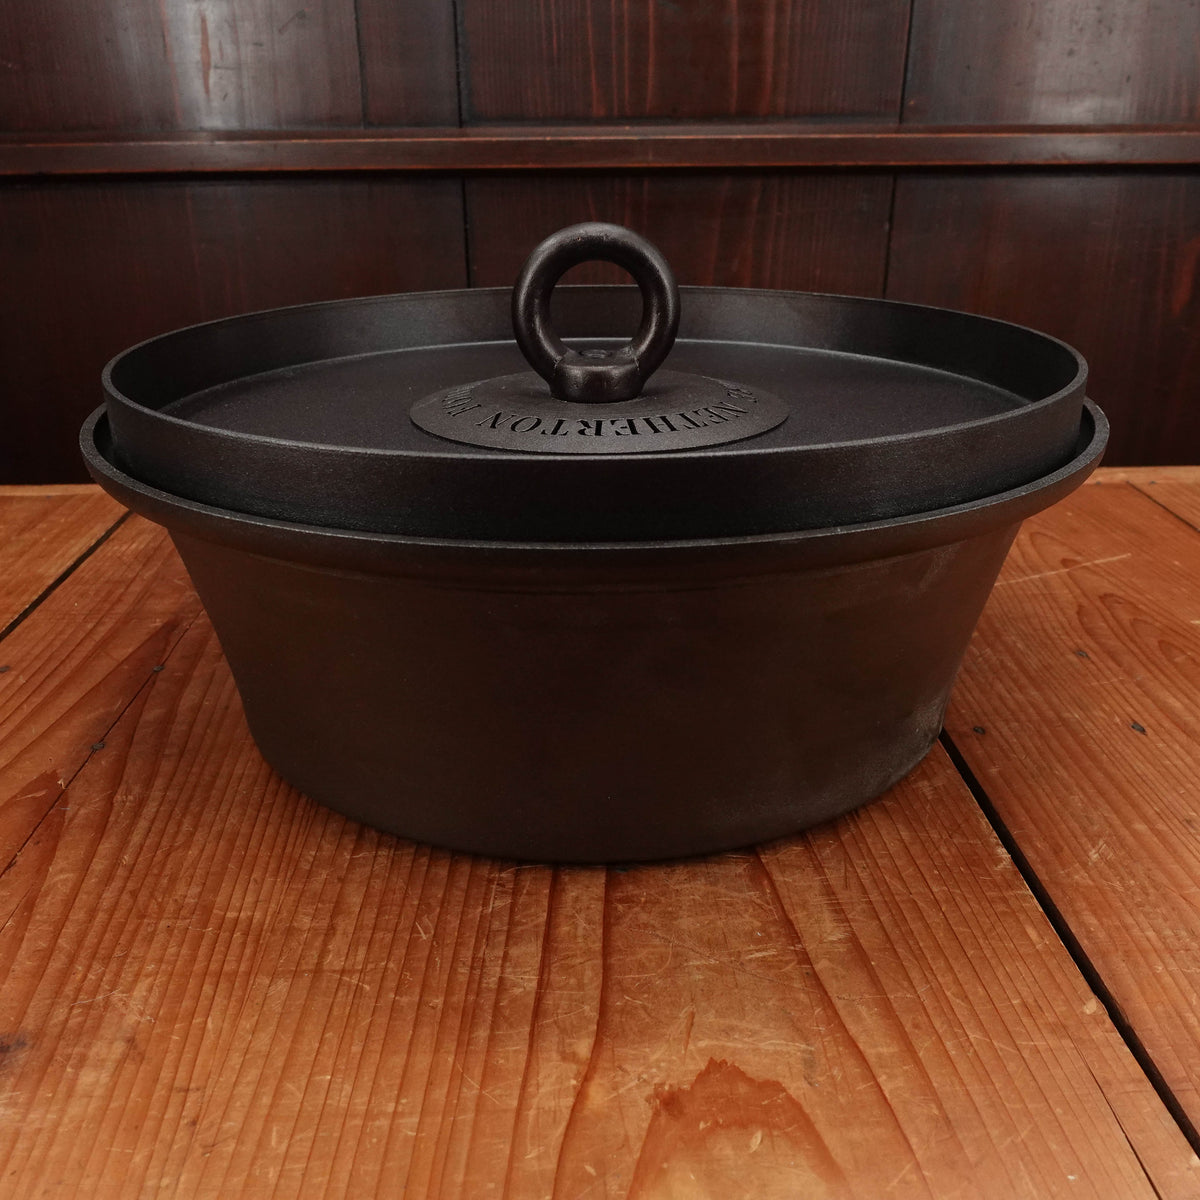 Netherton Foundry Dutch Oven with Hot Coals Lid